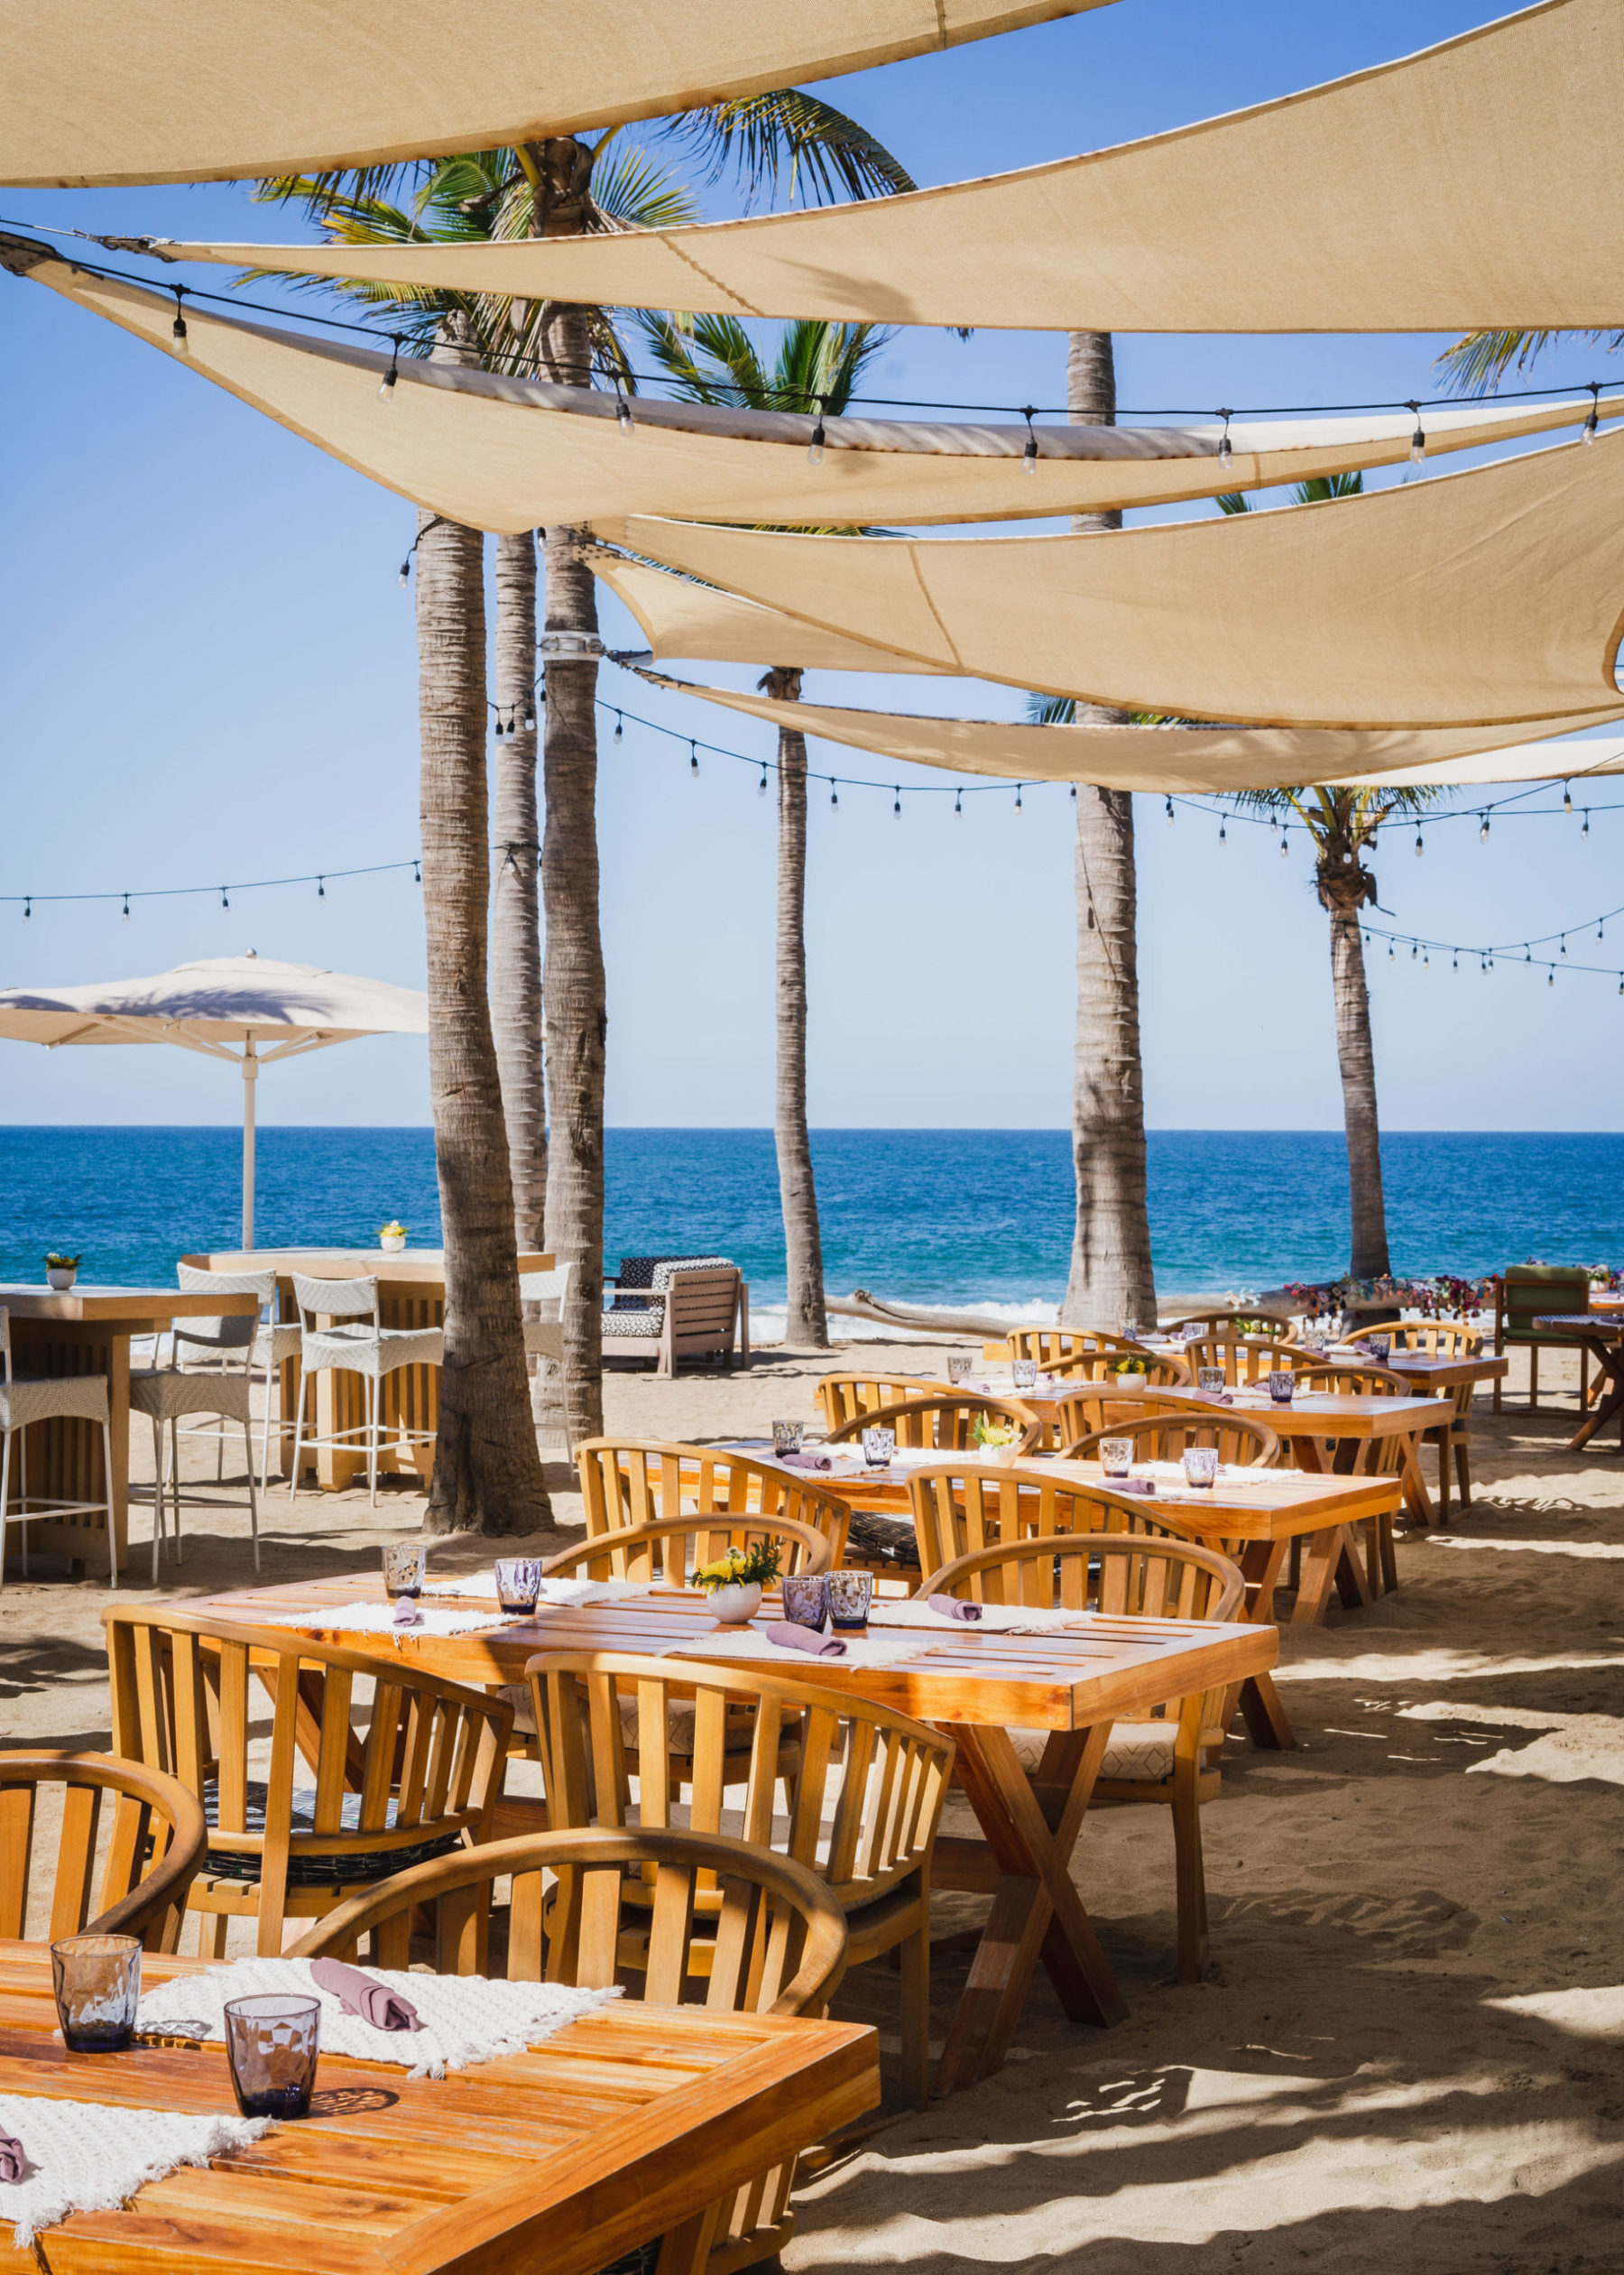 Dining tables on the beach arranged by the restaurant